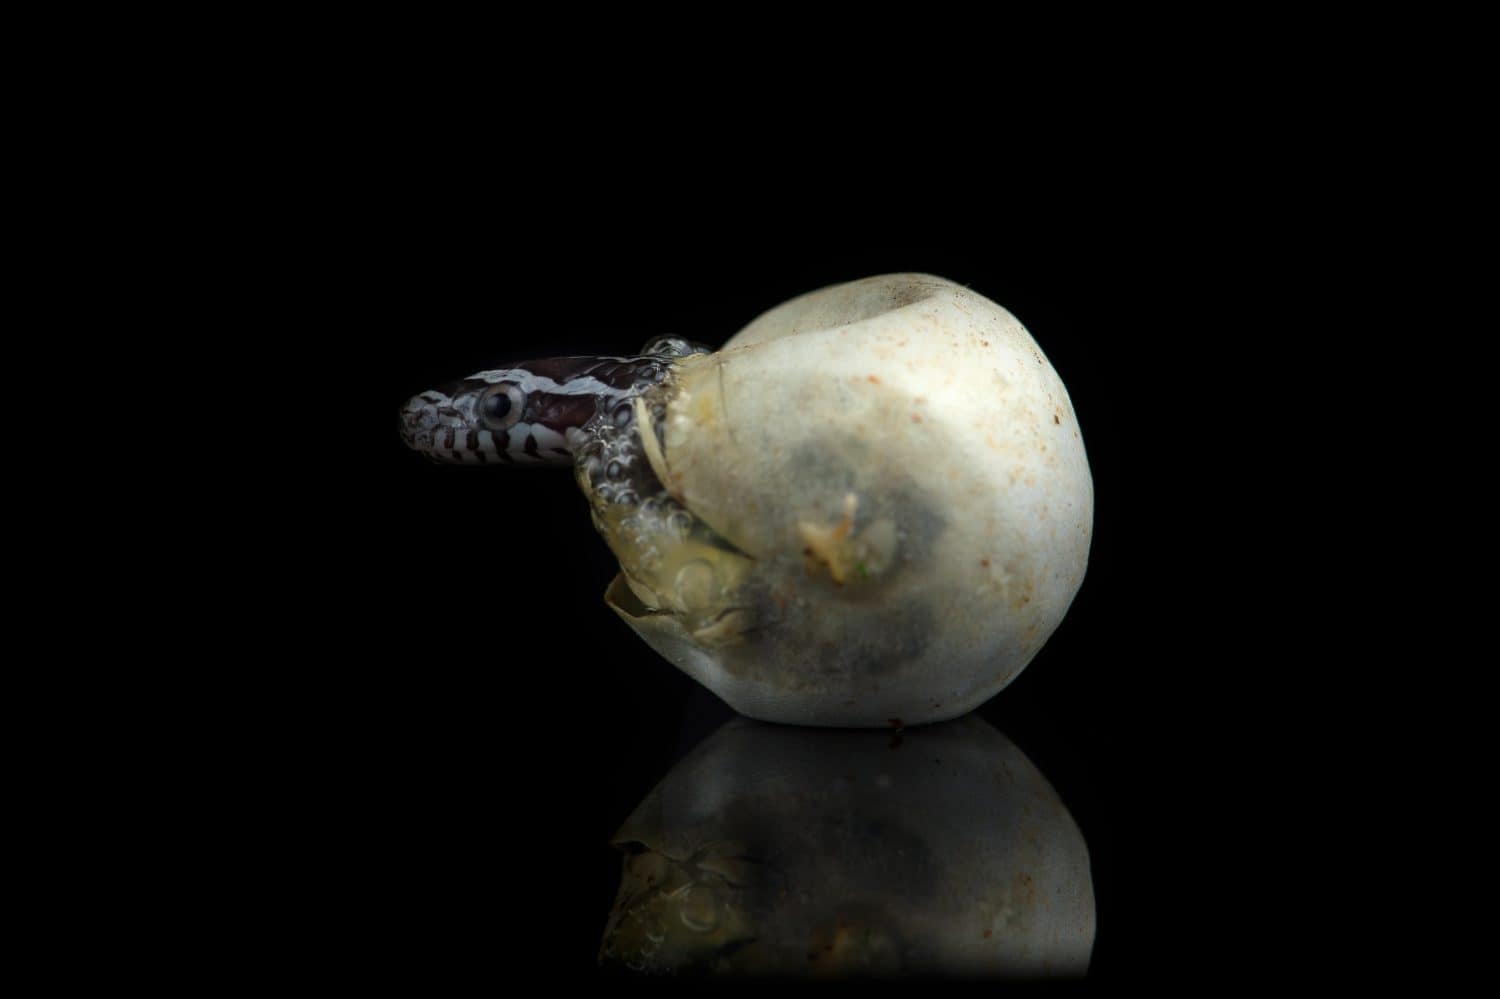 Corn snake hatching from an egg in captivity reflected on a black background